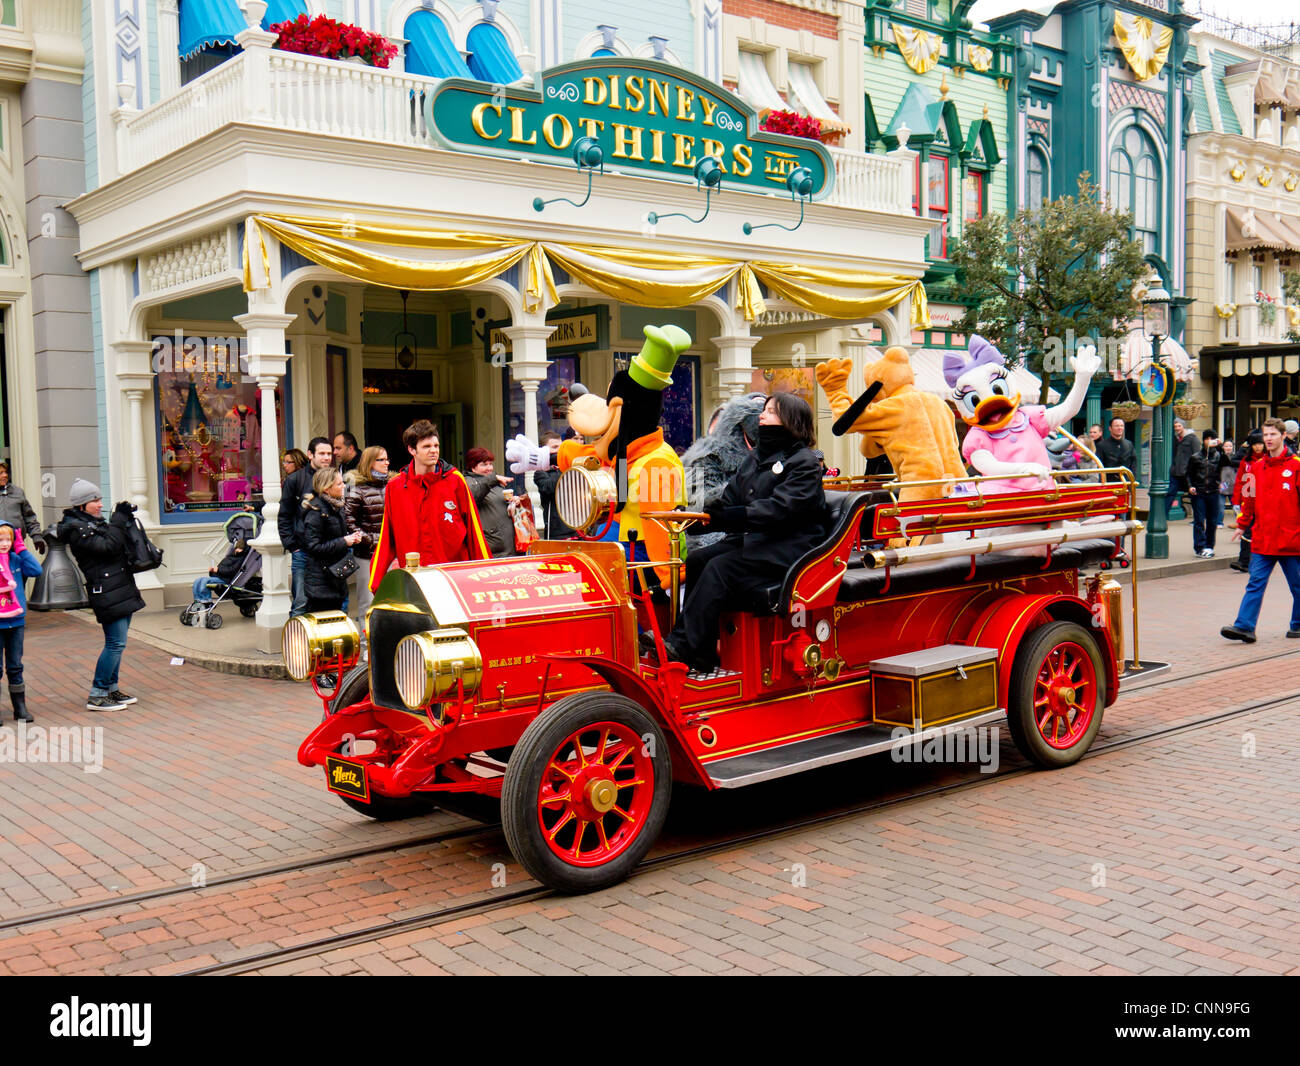 A fire truck at Disneyland Paris gives a ride to Goofy, Pluto and Daisy Duck Stock Photo